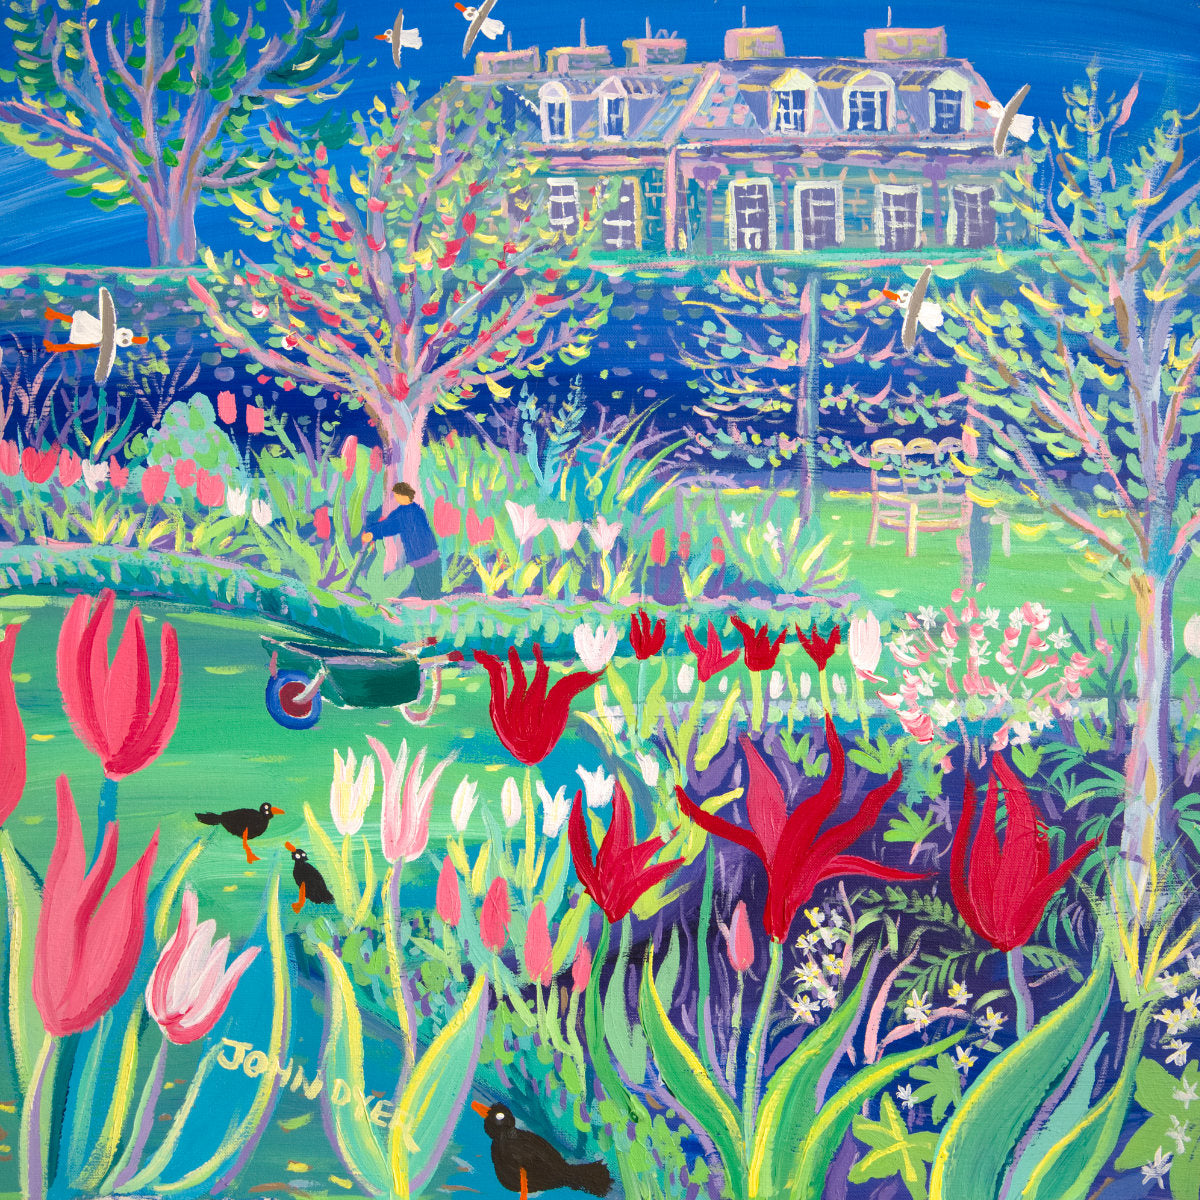 &#39;The Flower Garden Antony House&#39;, 24x24 inches acrylic on canvas. Cornwall Painting by Cornish Artist John Dyer. Cornwall Art Gallery